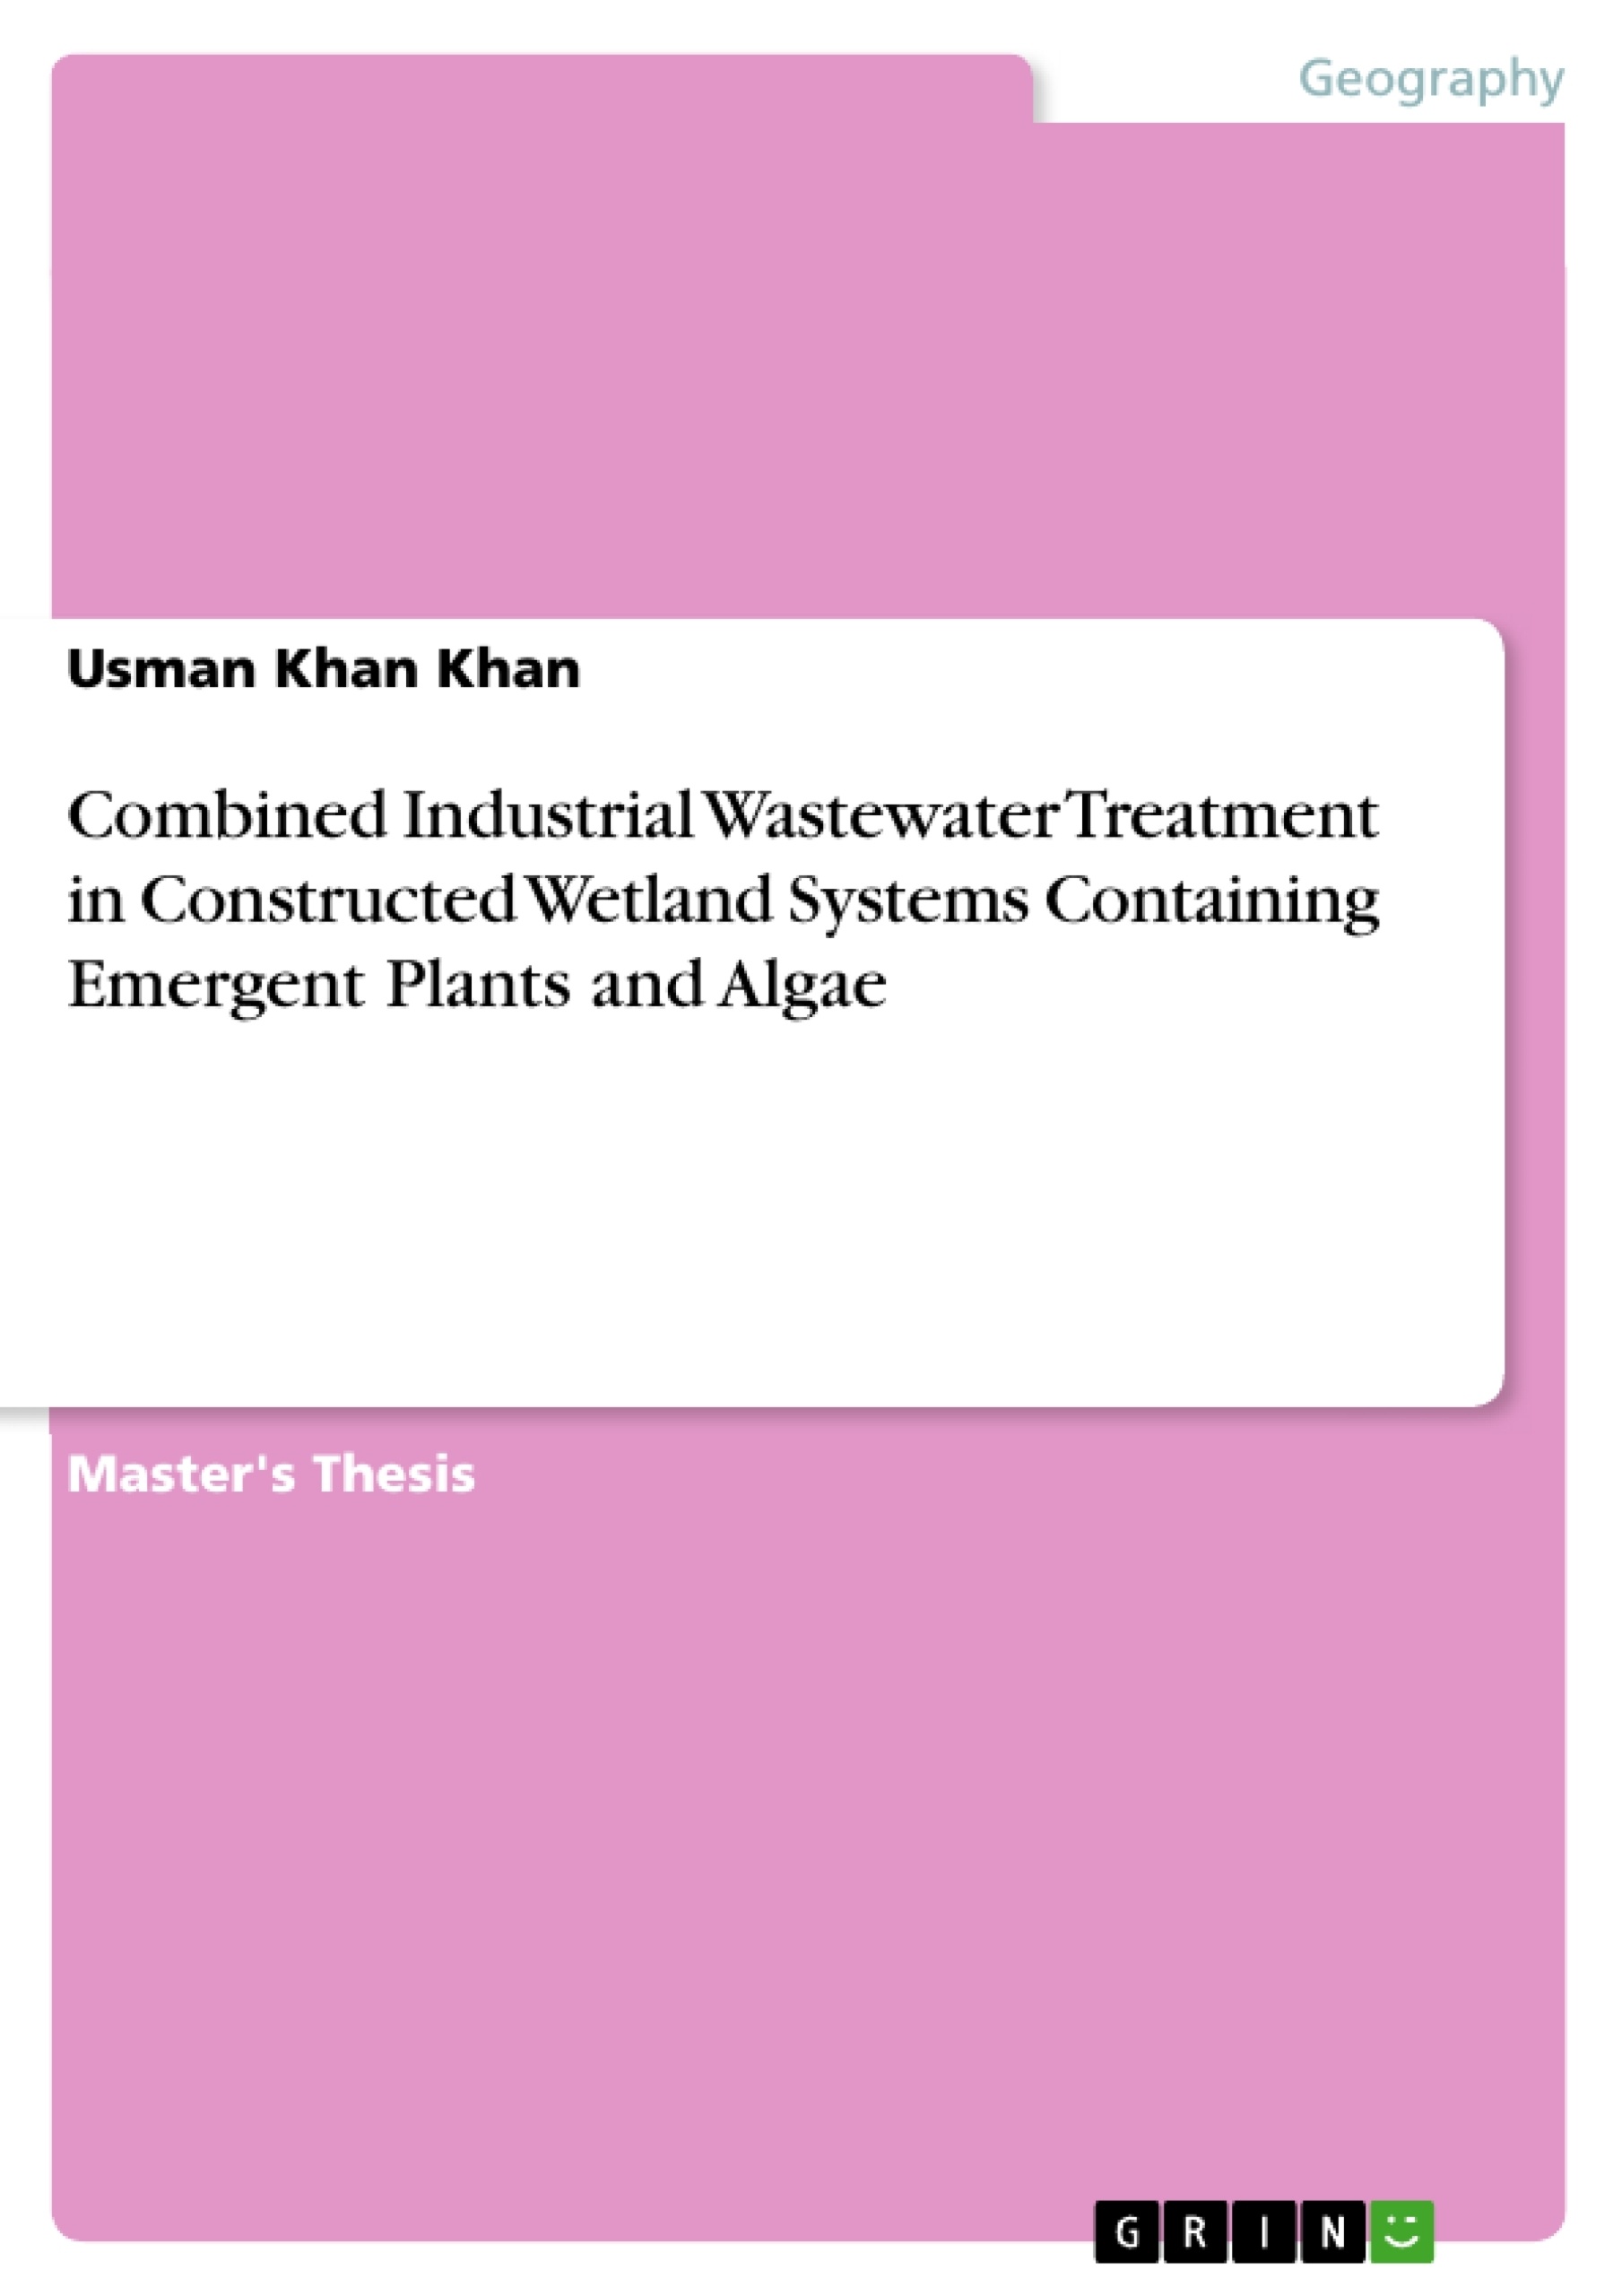 Title: Combined Industrial Wastewater Treatment in Constructed Wetland Systems Containing Emergent Plants and Algae